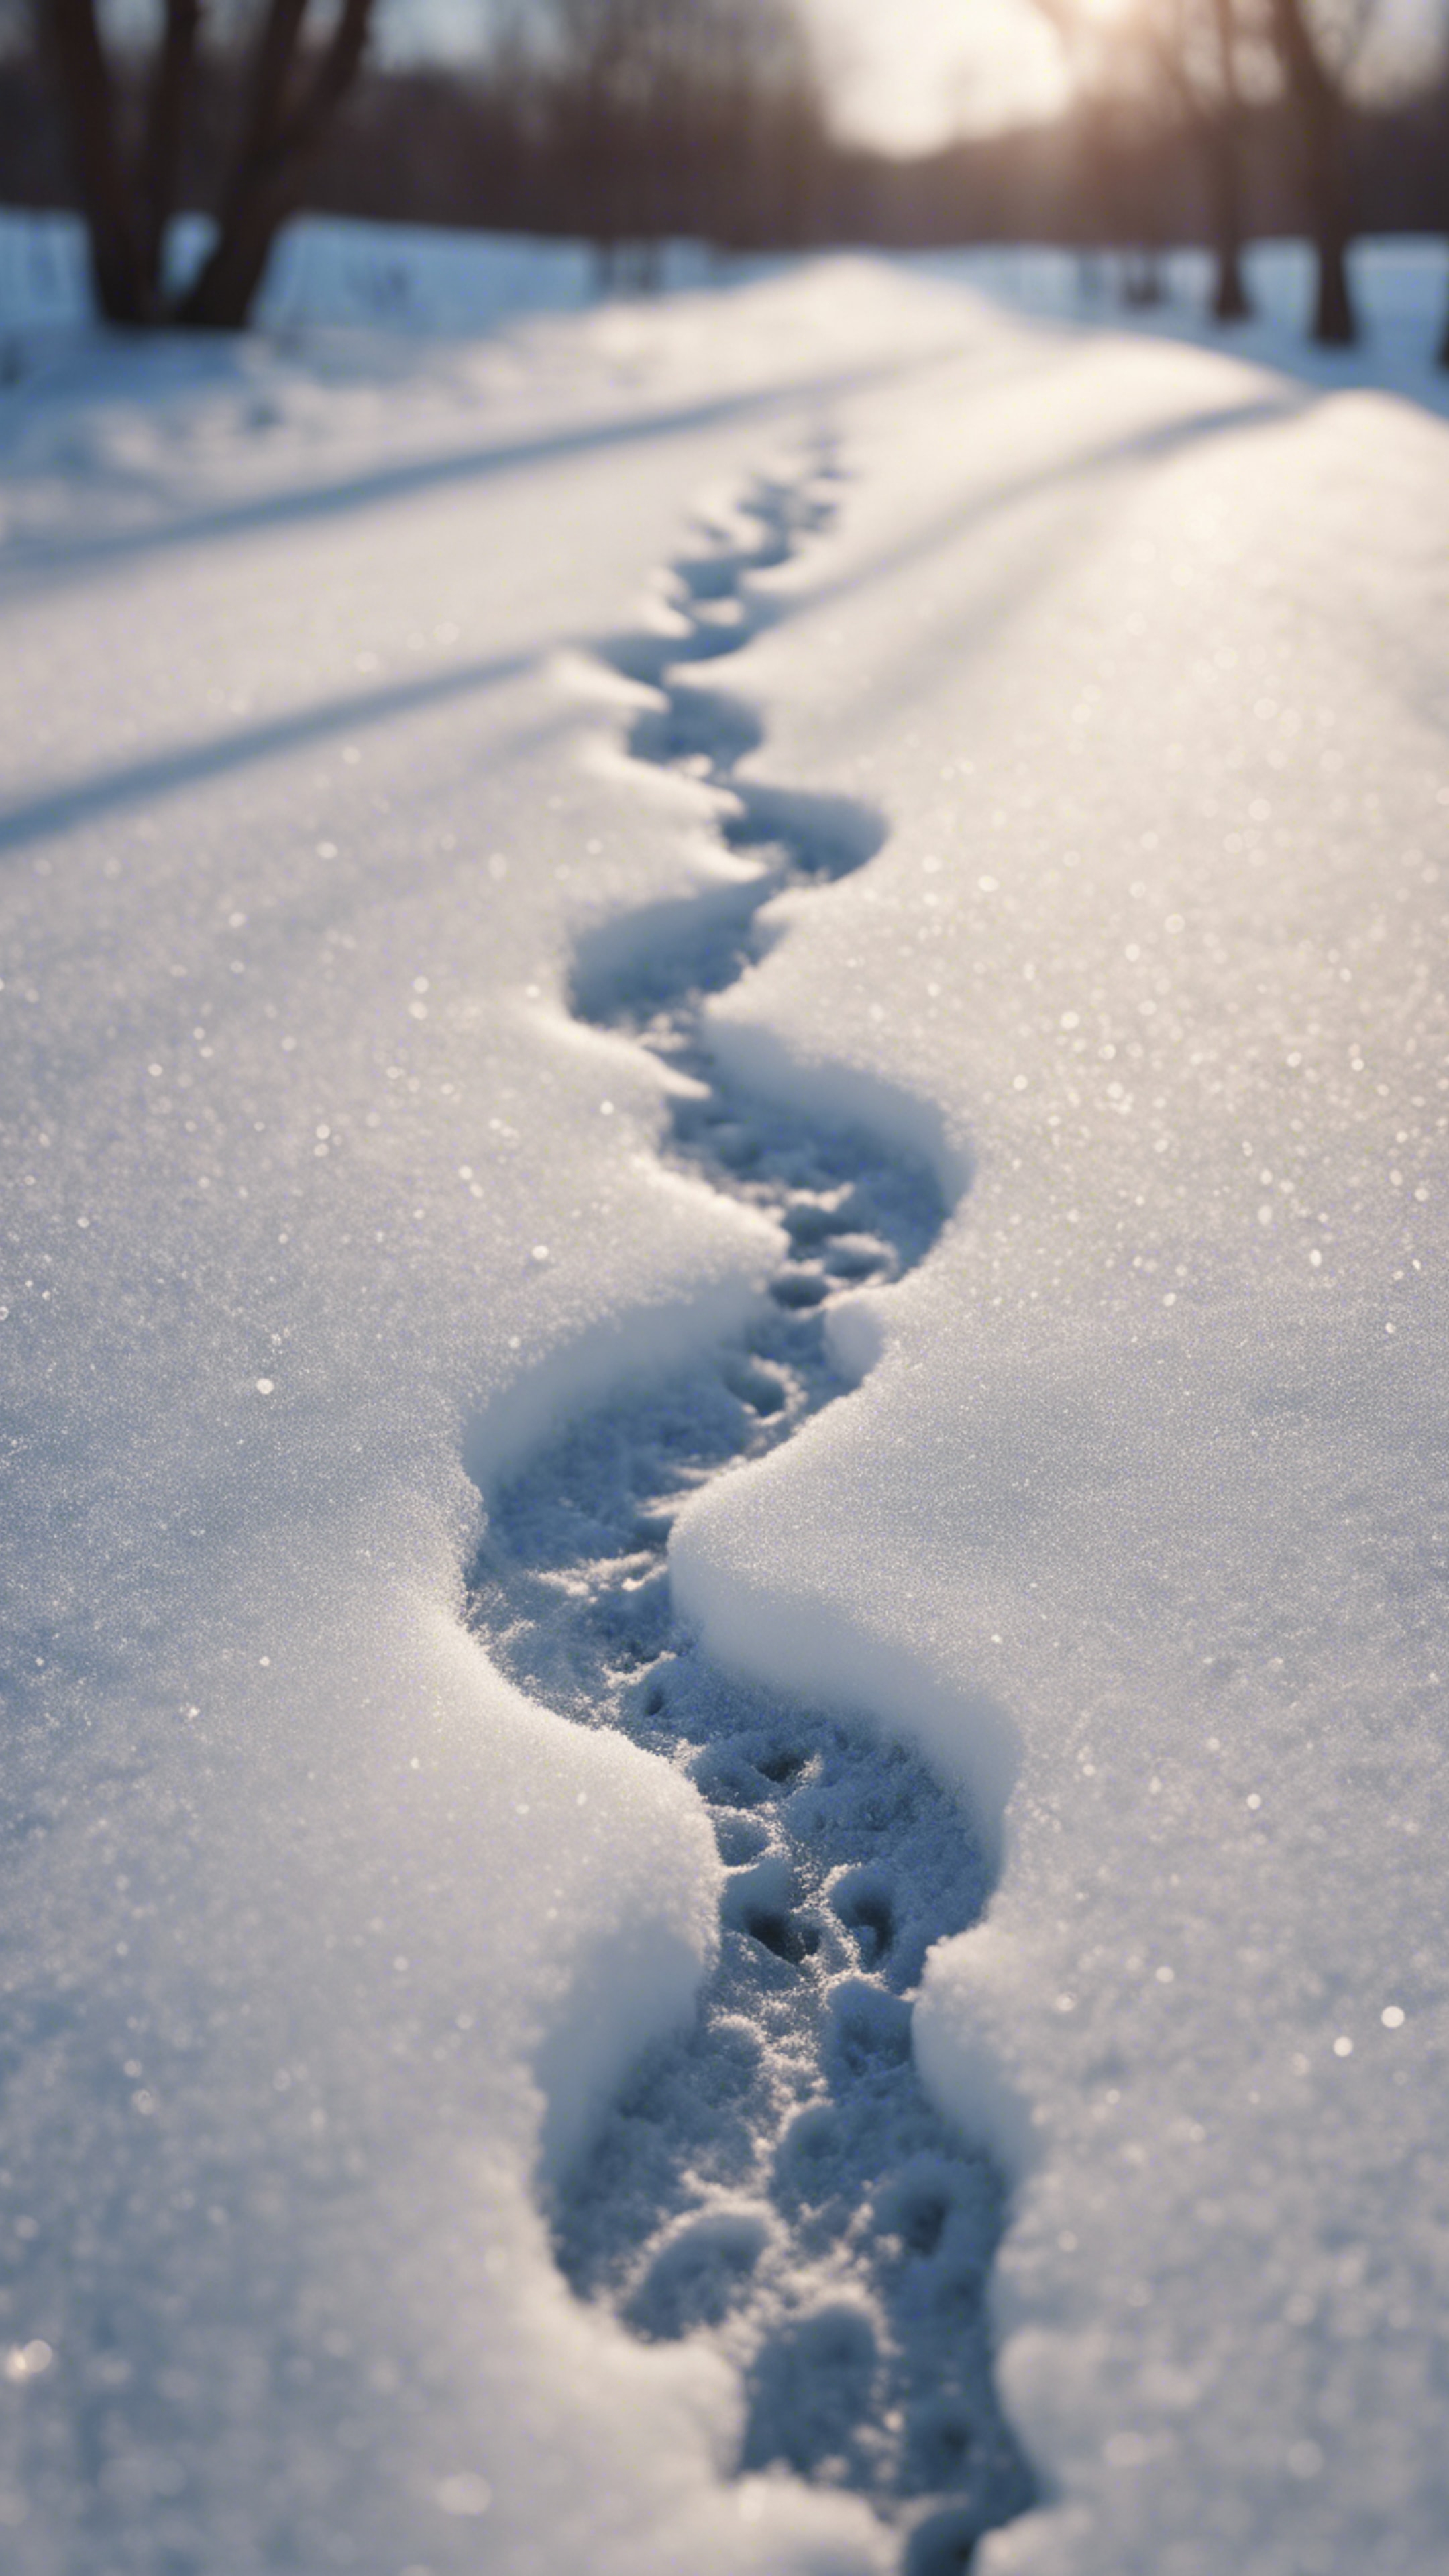 A pair of frosty, heart-shaped footprints imprinted on a snow-covered lane, symbolizing love in winter. Tapeta[a9223da6c59742c6a00f]